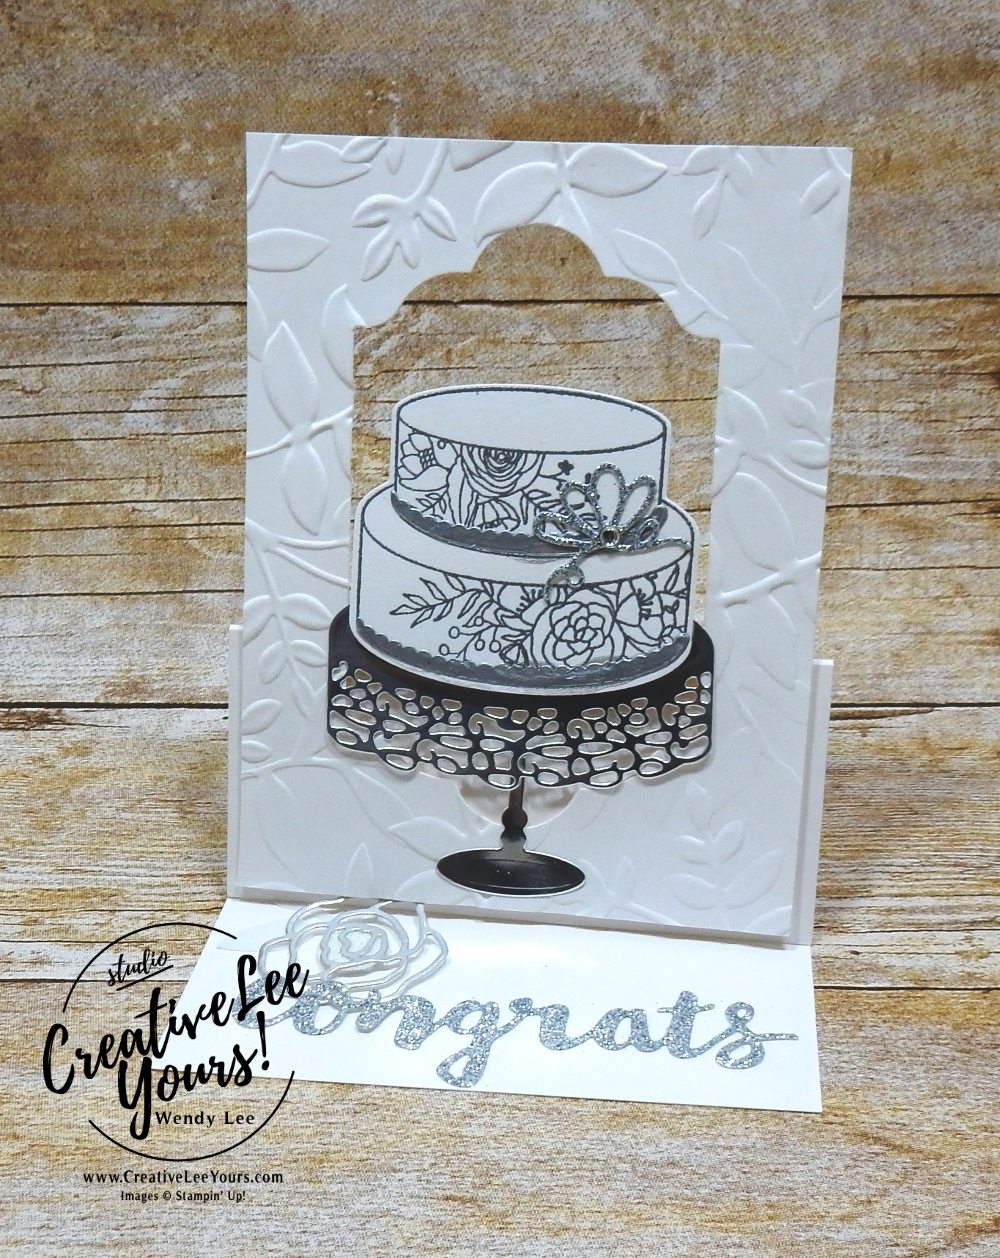 Best Wishes Easel by Wendy lee, Stampin Up, stamping, hand made, wedding, anniversary, birthday,#creativeleeyours, creatively yours, February 2018 FMN card class, forget me not, SAB, Sale-a-bration,Cake Soiree stamp set, FREE stamps,sweet cake framelits,SU,fun fold, embossing